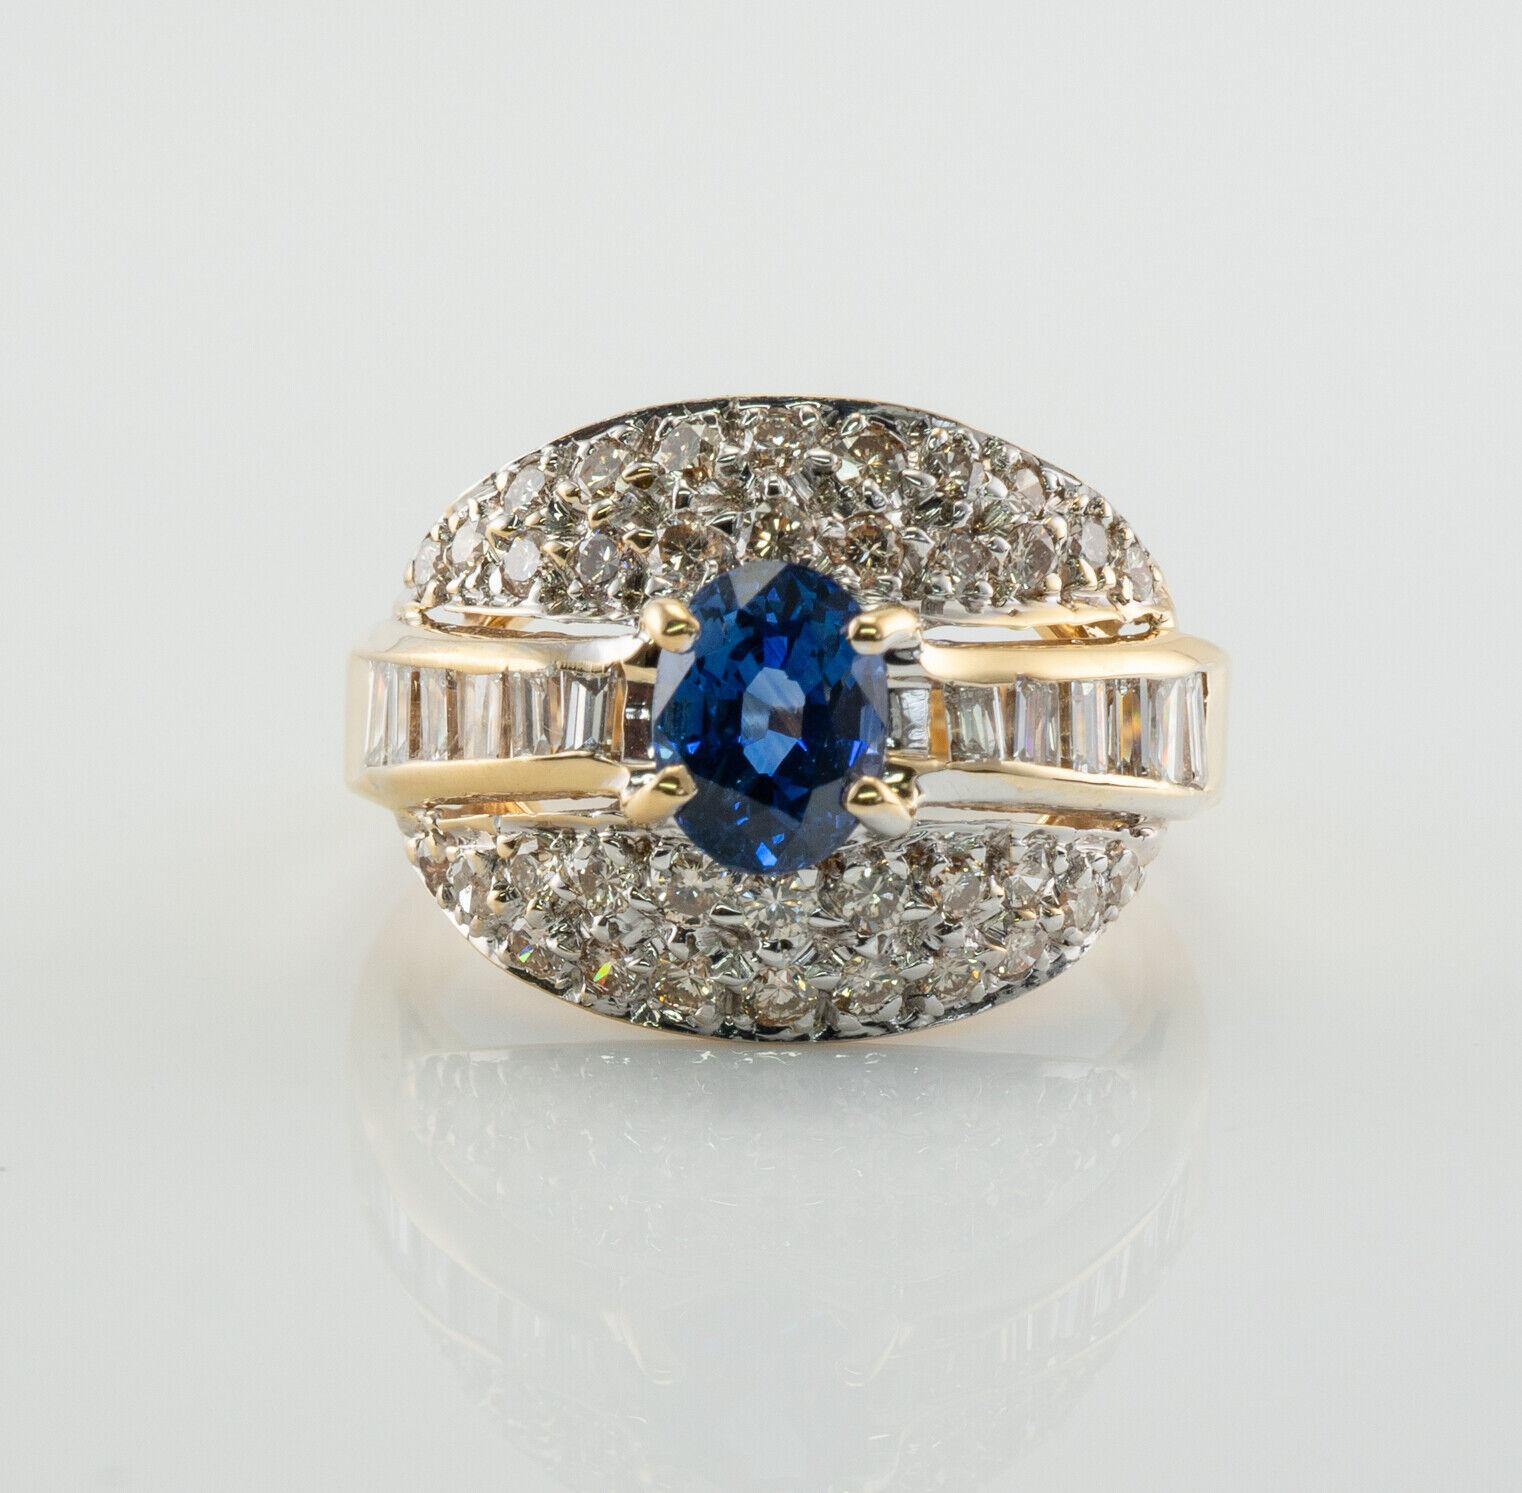 This beautiful estate ring is finely crafted in solid 18K Yellow Gold and set with genuine Earth mined Ceylon Sapphire and diamonds. There is a G.C & G hallmark inside of the shank. The center oval cut Sapphire measures 6mm x 4mm (.60 carat) and